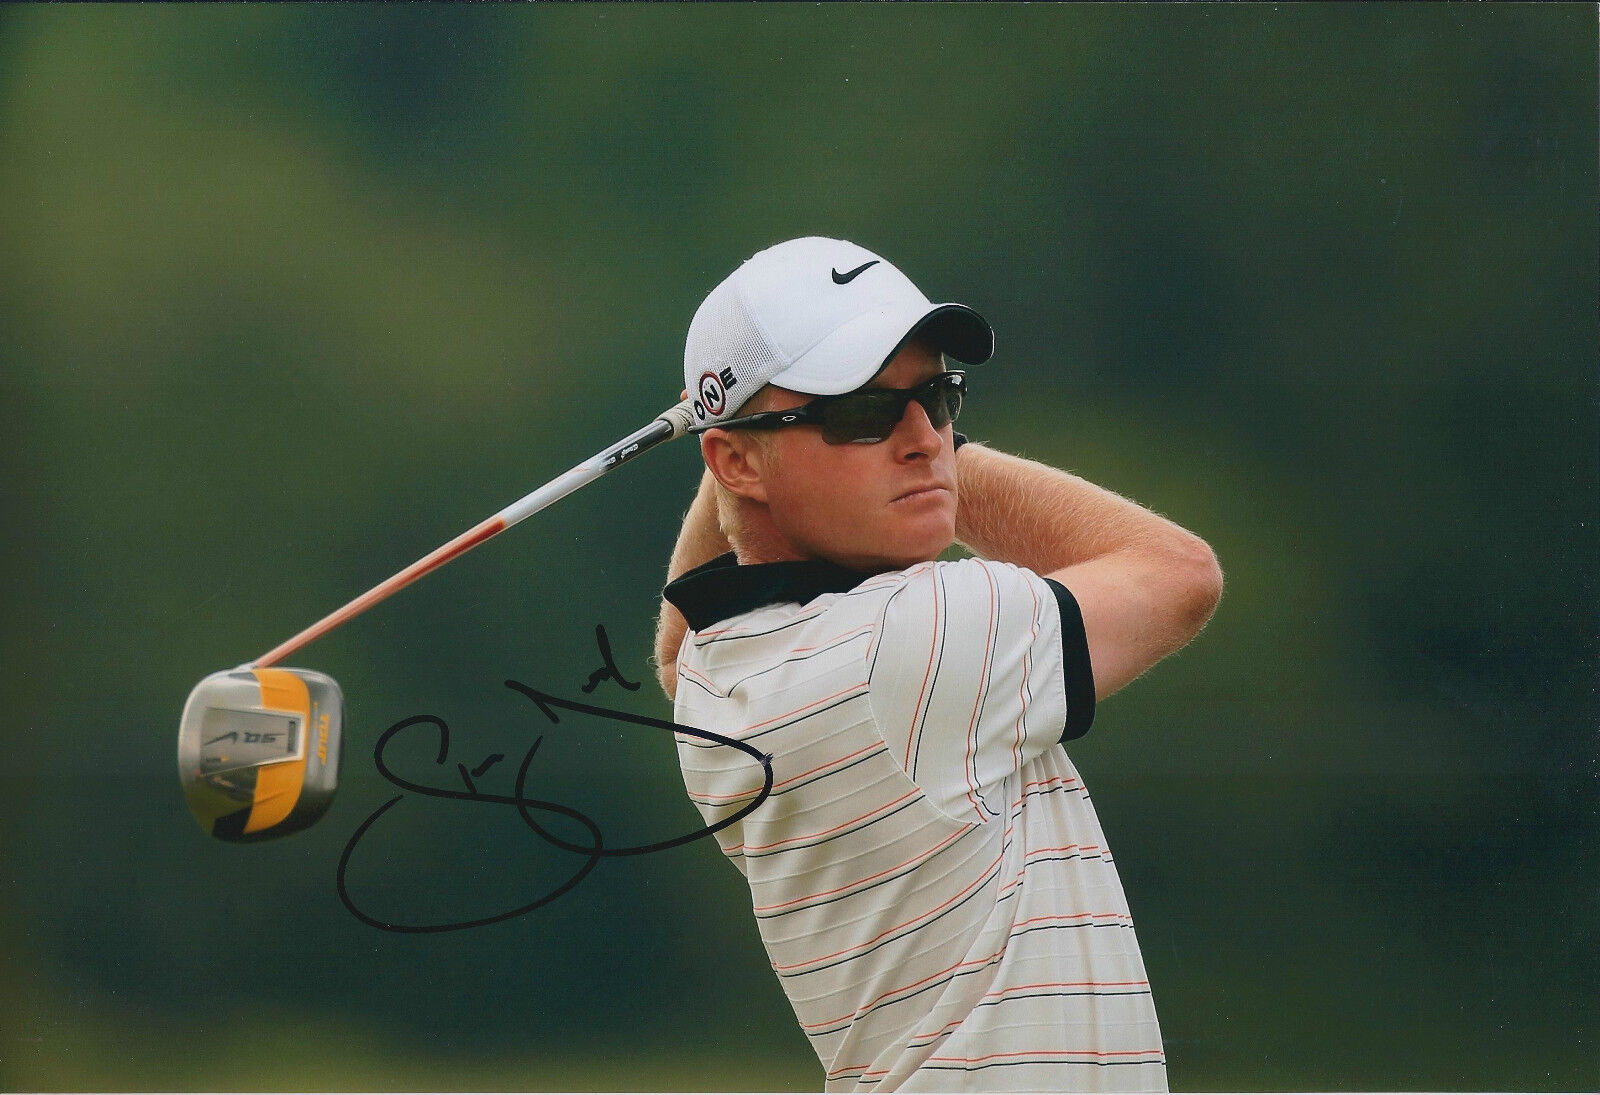 Simon DYSON SIGNED 12x8 Photo Poster painting AFTAL Autograph COA GB & Ireland Walker Cup GOLF